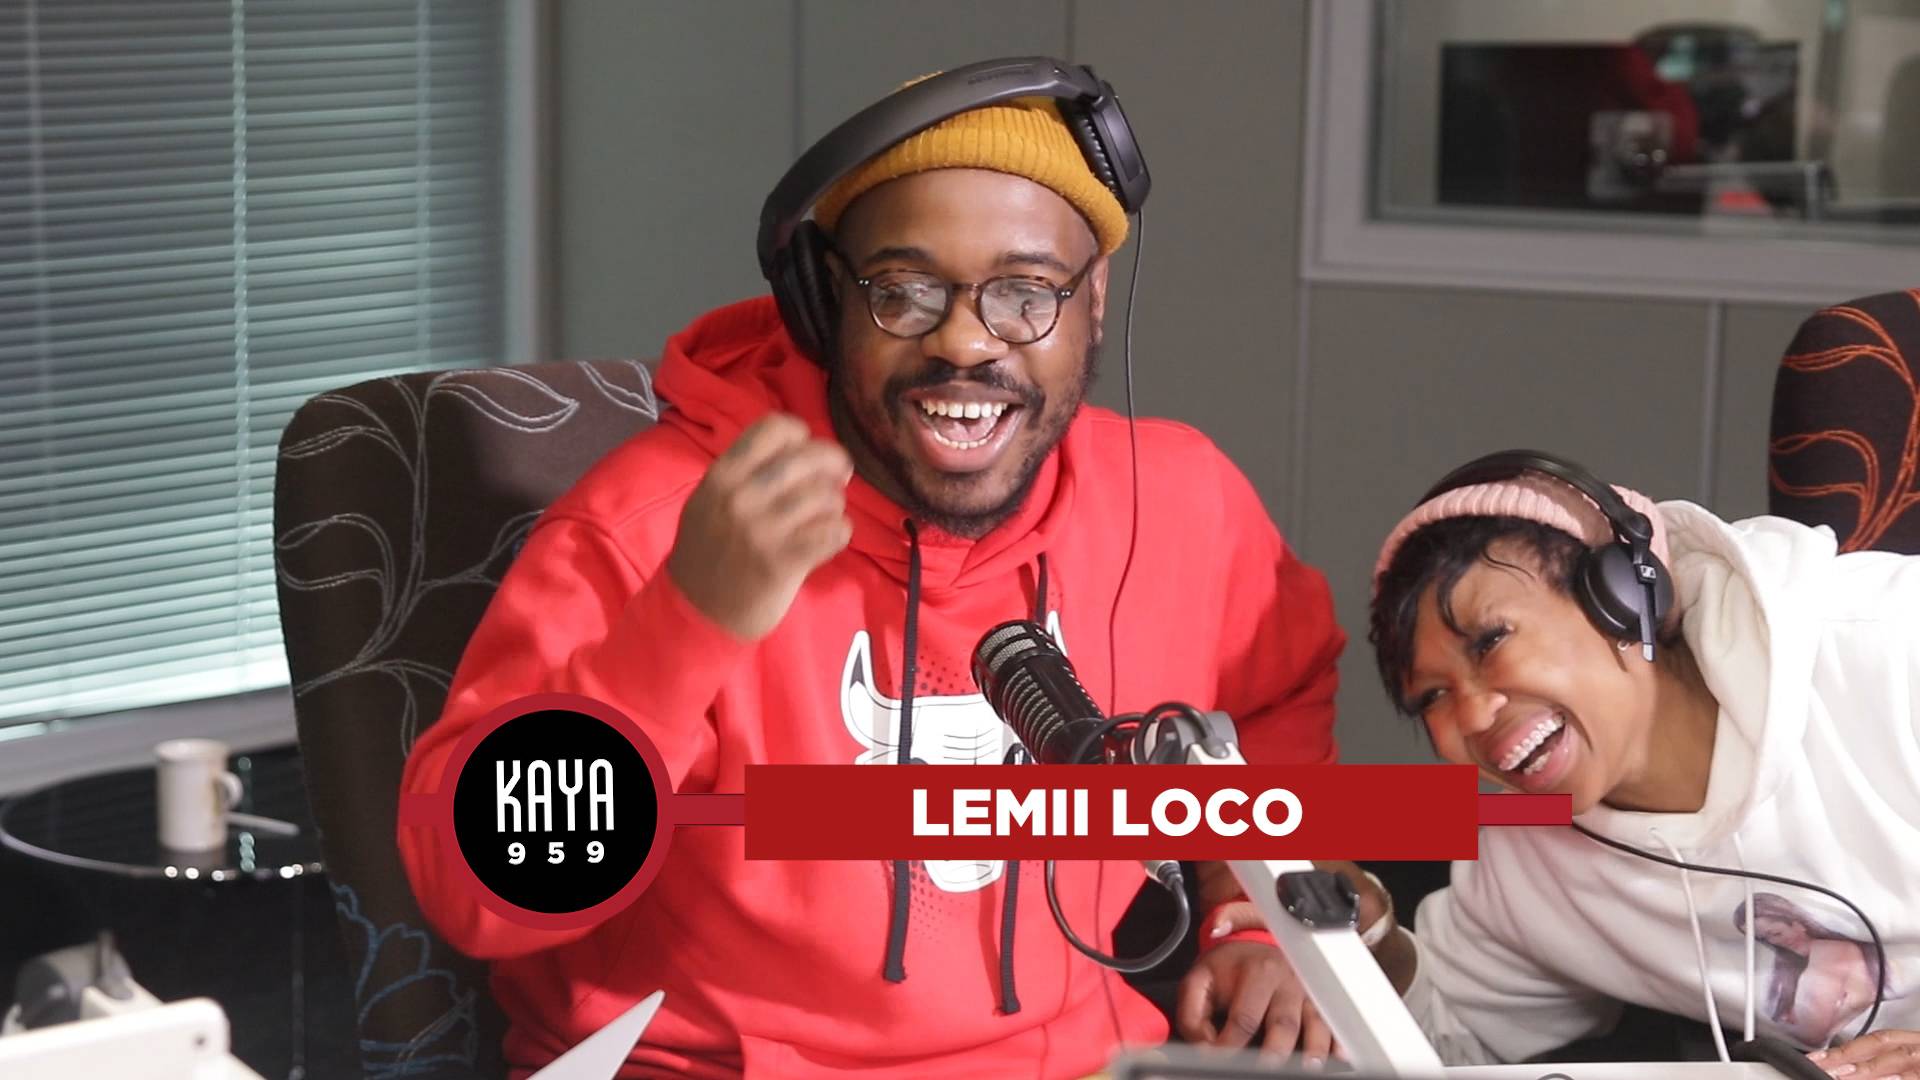 Lemii Loco on quitting his job to pursue Social Media full-time